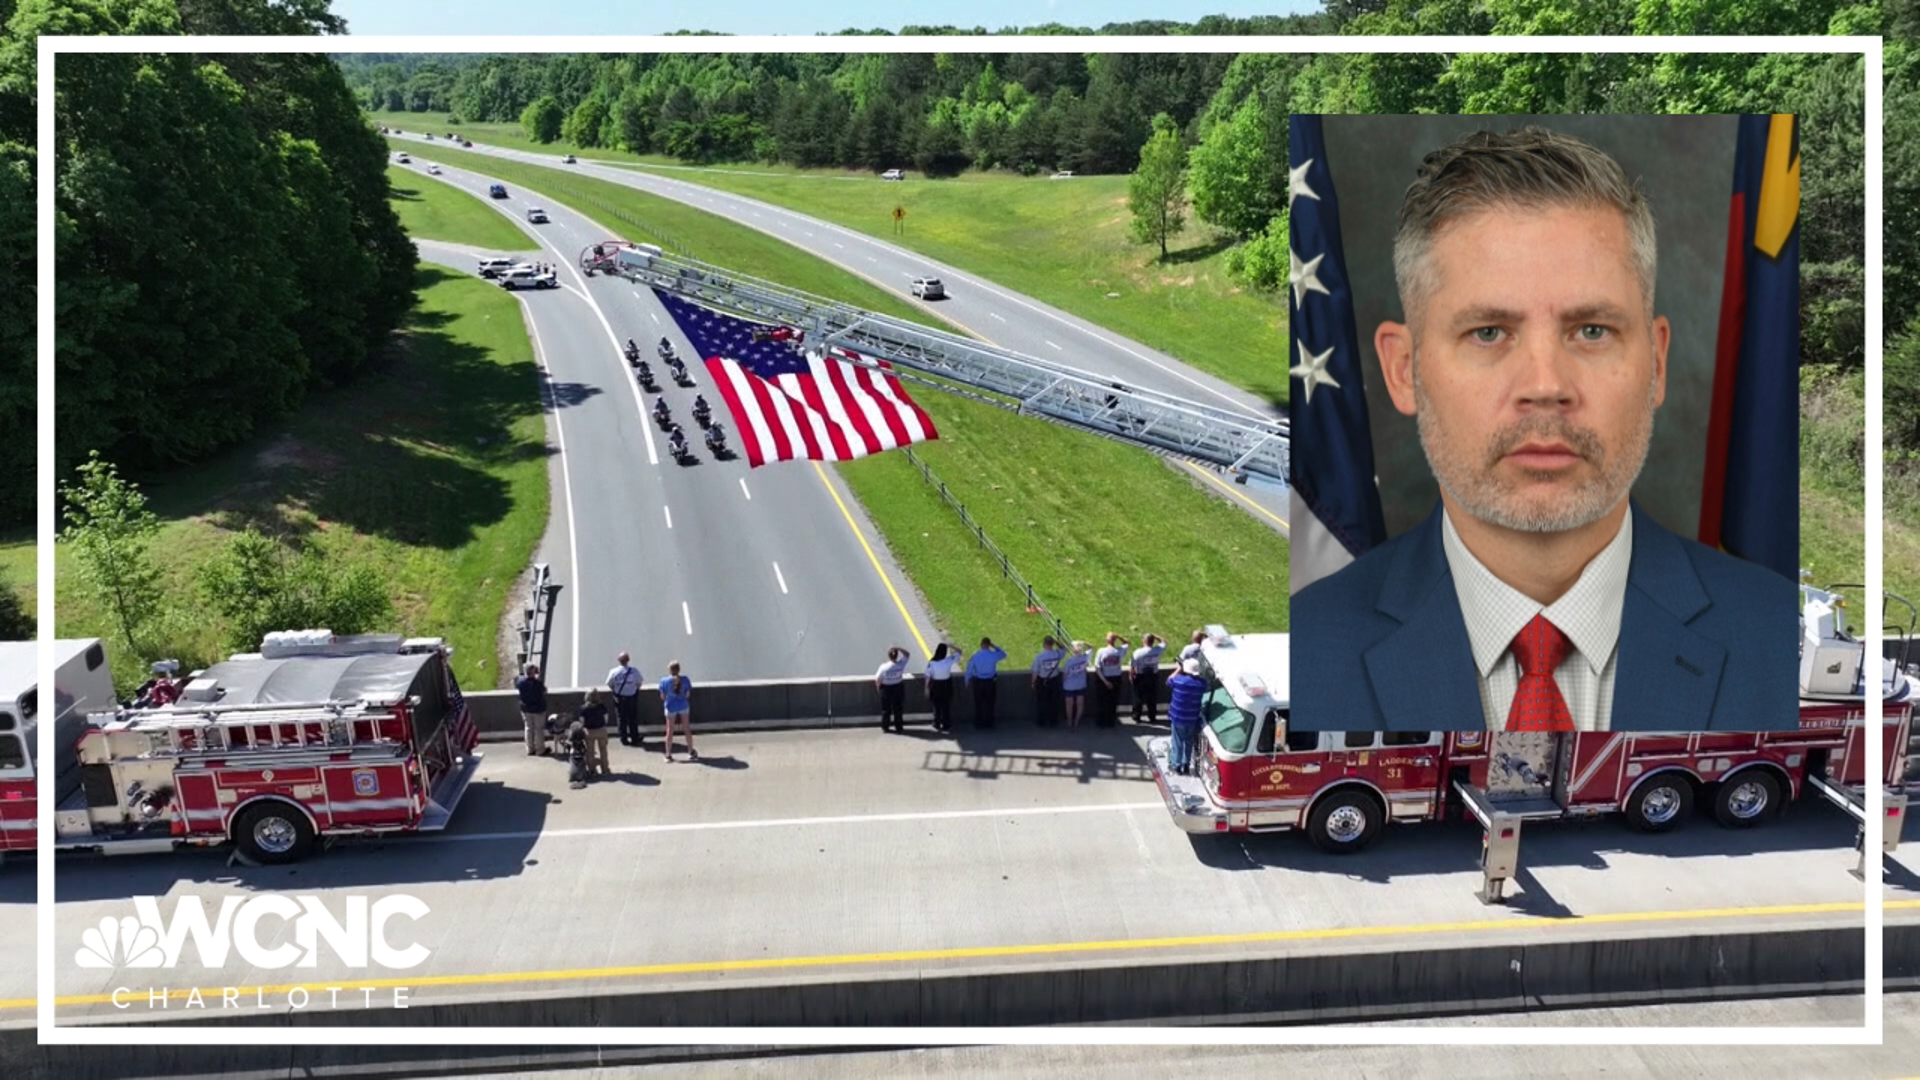 Dozens of law enforcement officers and members of the community lined the streets as the body of Alden Elliott was taken from Charlotte to the town of Newton.